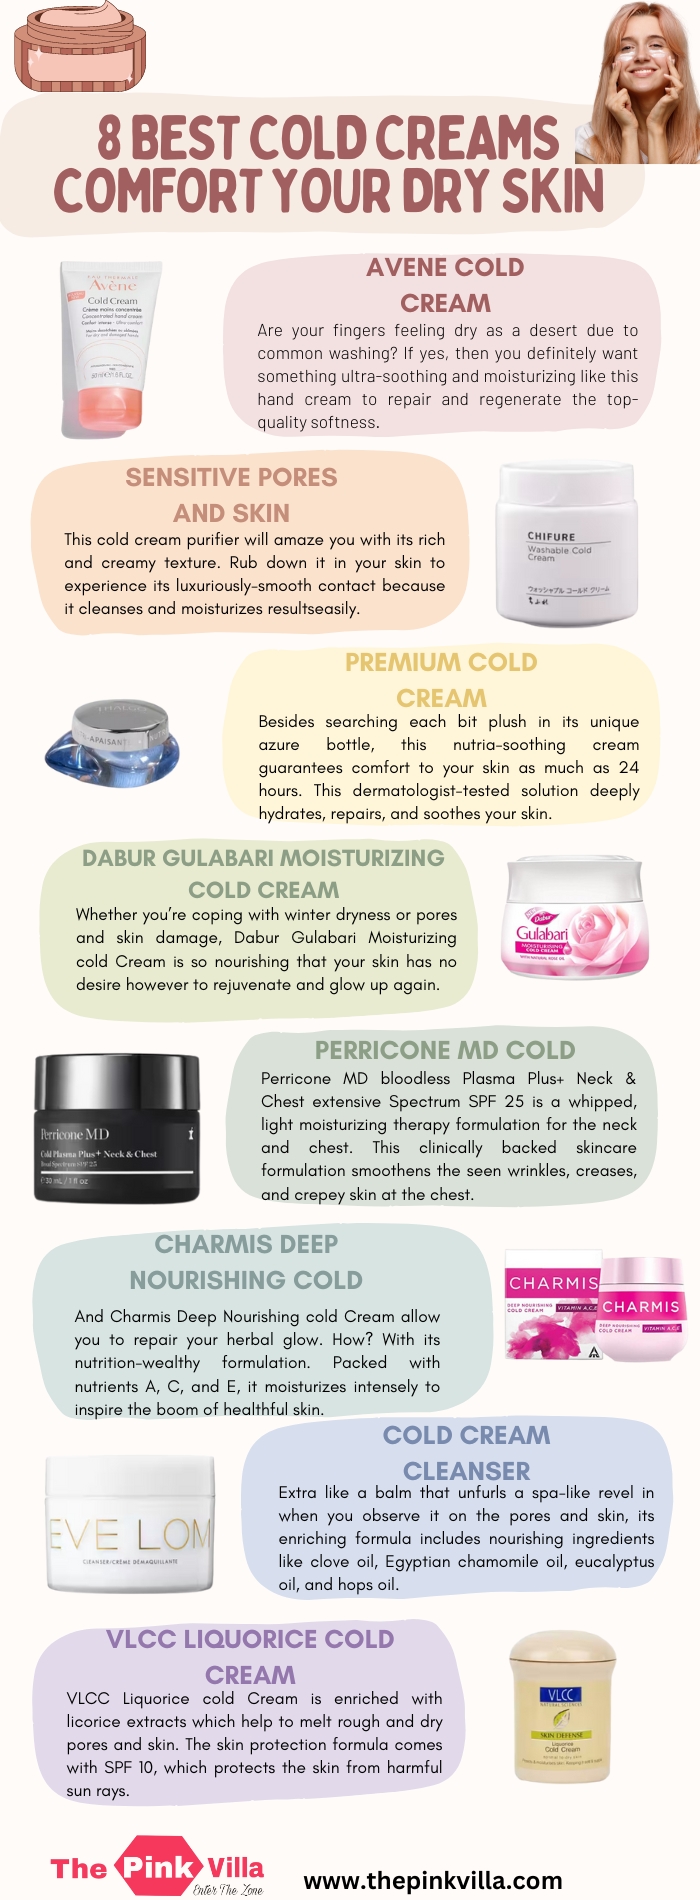 8 Best Cold Creams Comfort your dry skin